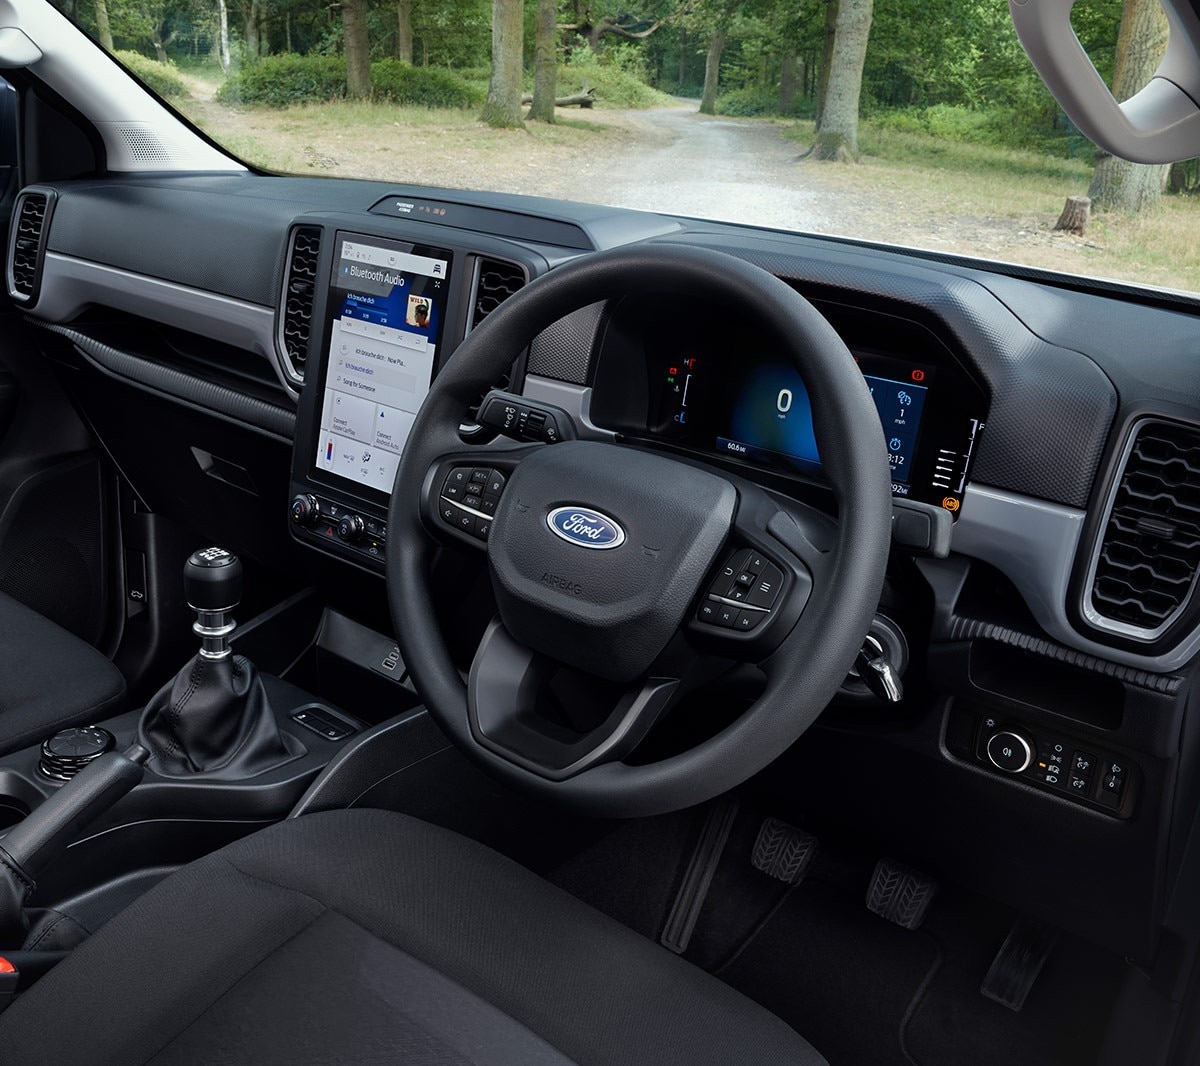 All-New Ford Ranger interior dash view